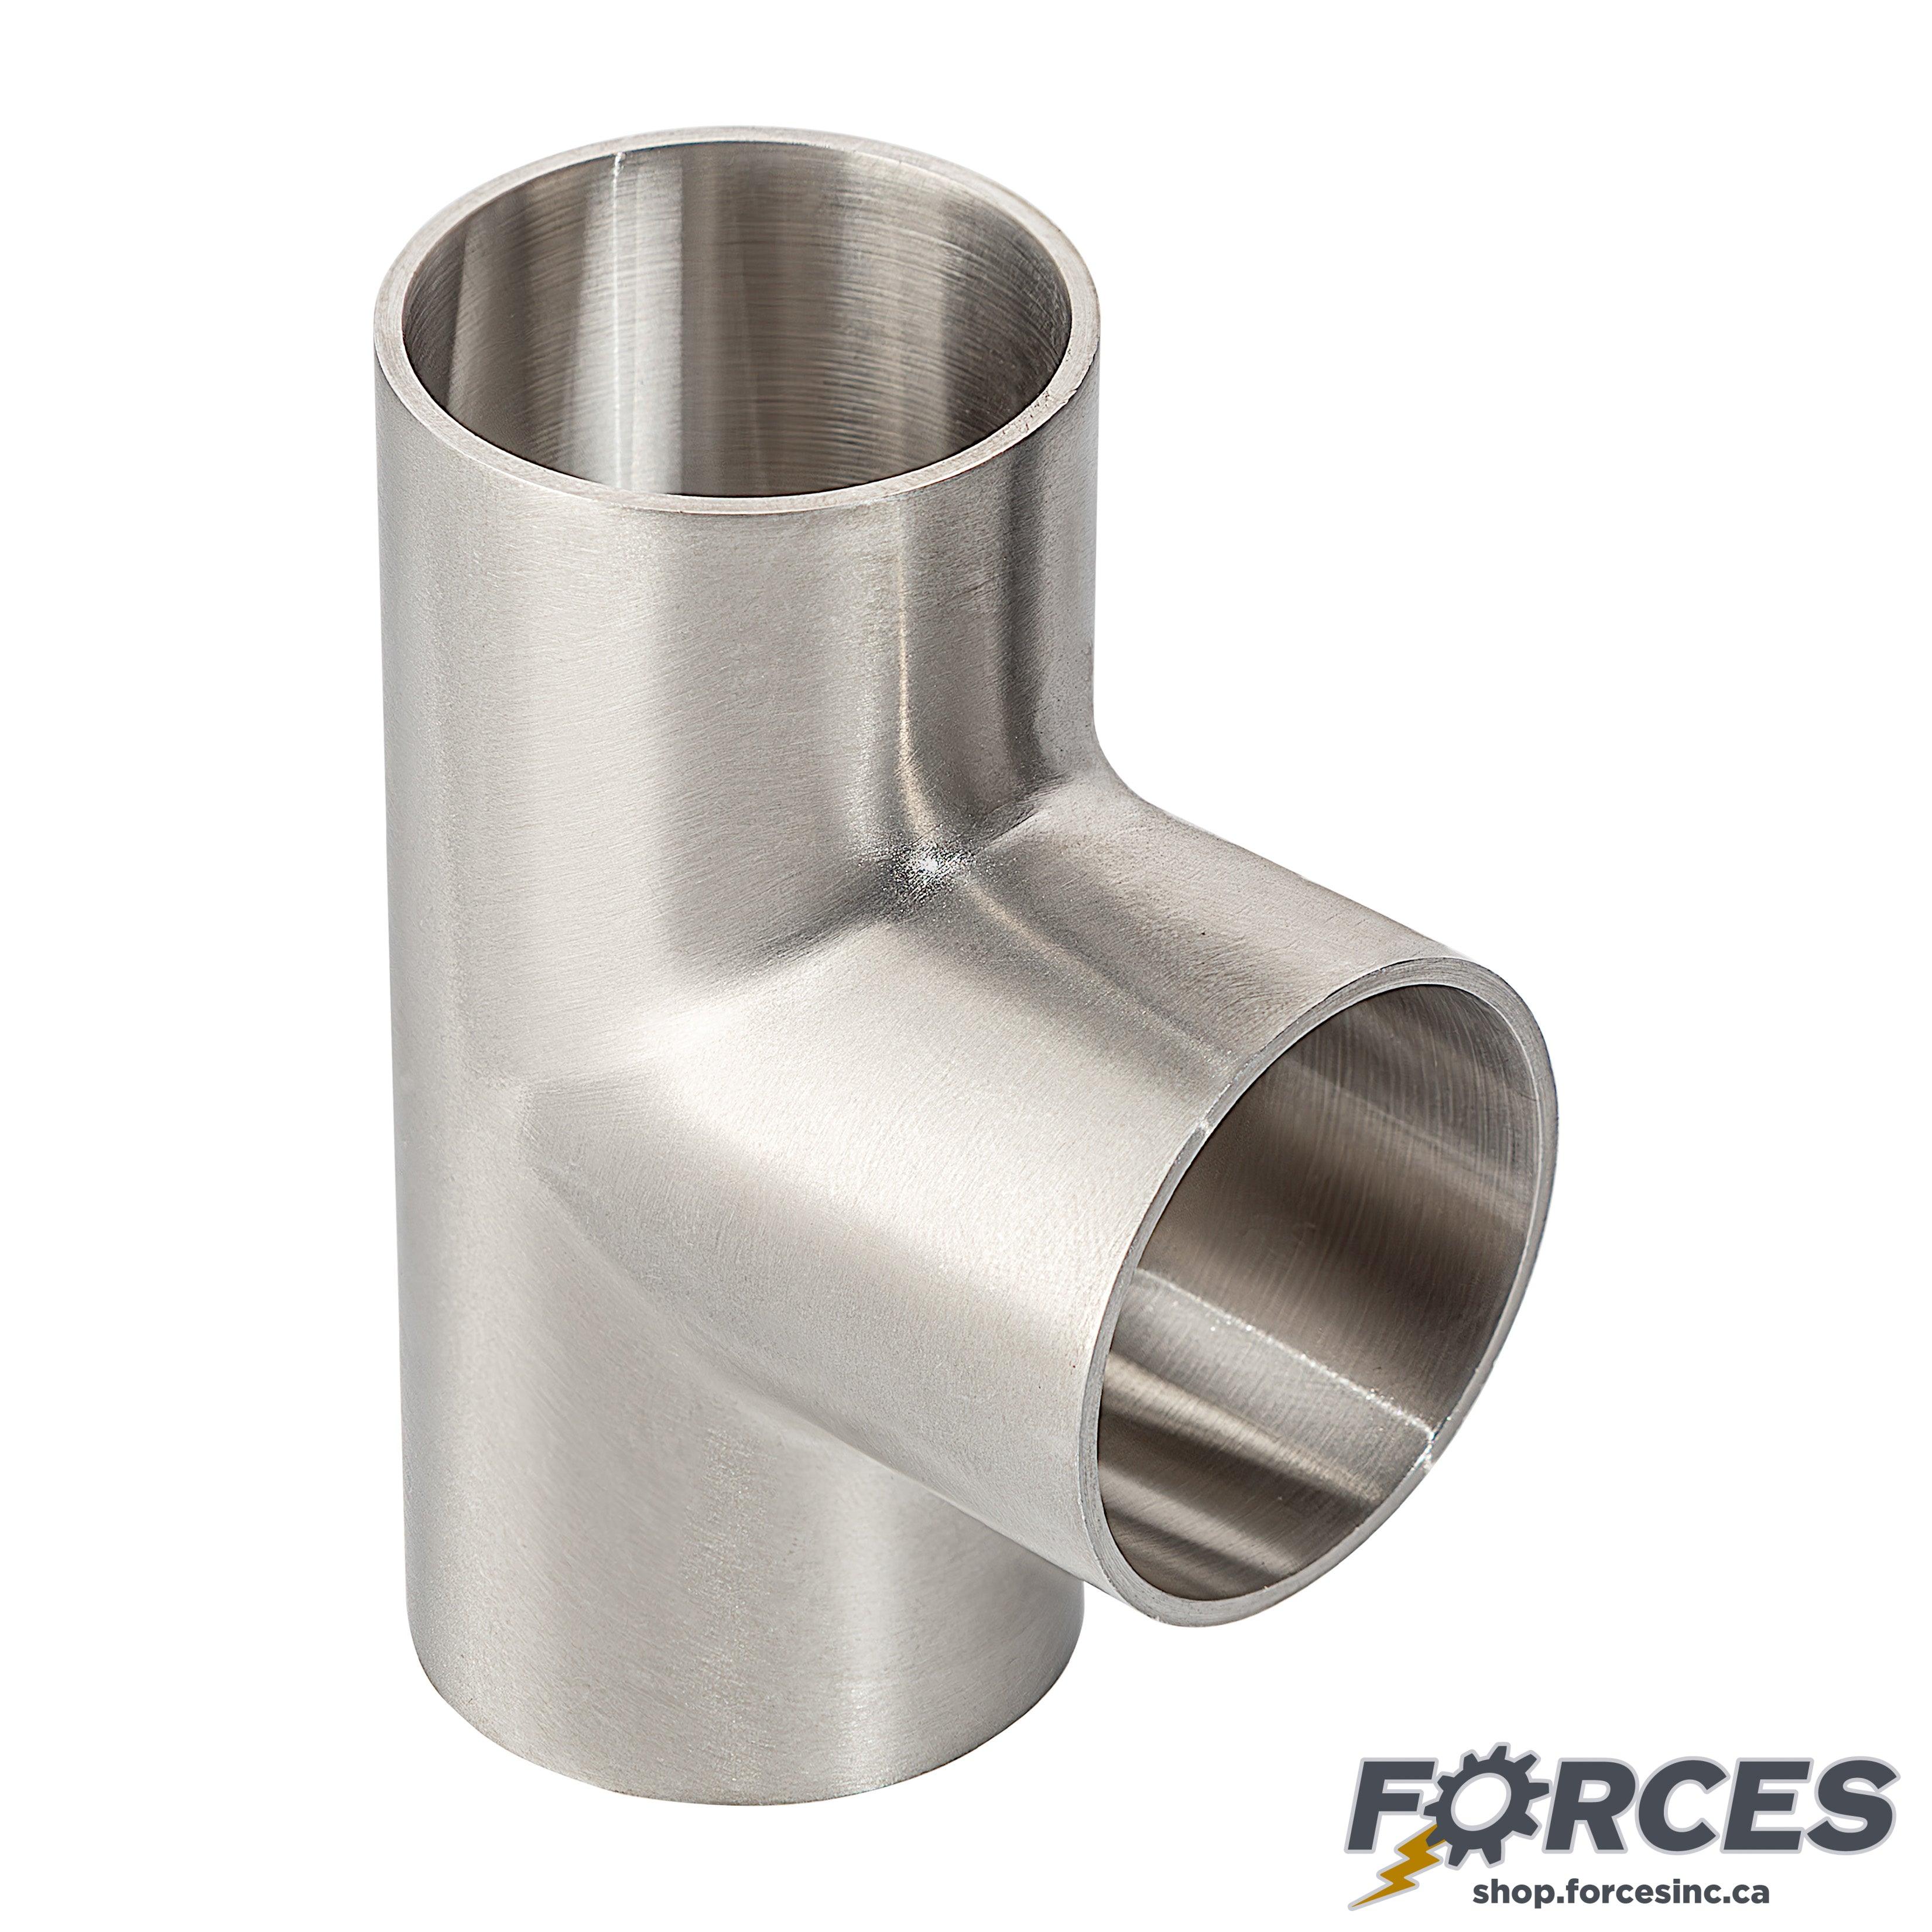 1-1/2" Butt Weld Short Tee - Stainless Steel 316 - Forces Inc